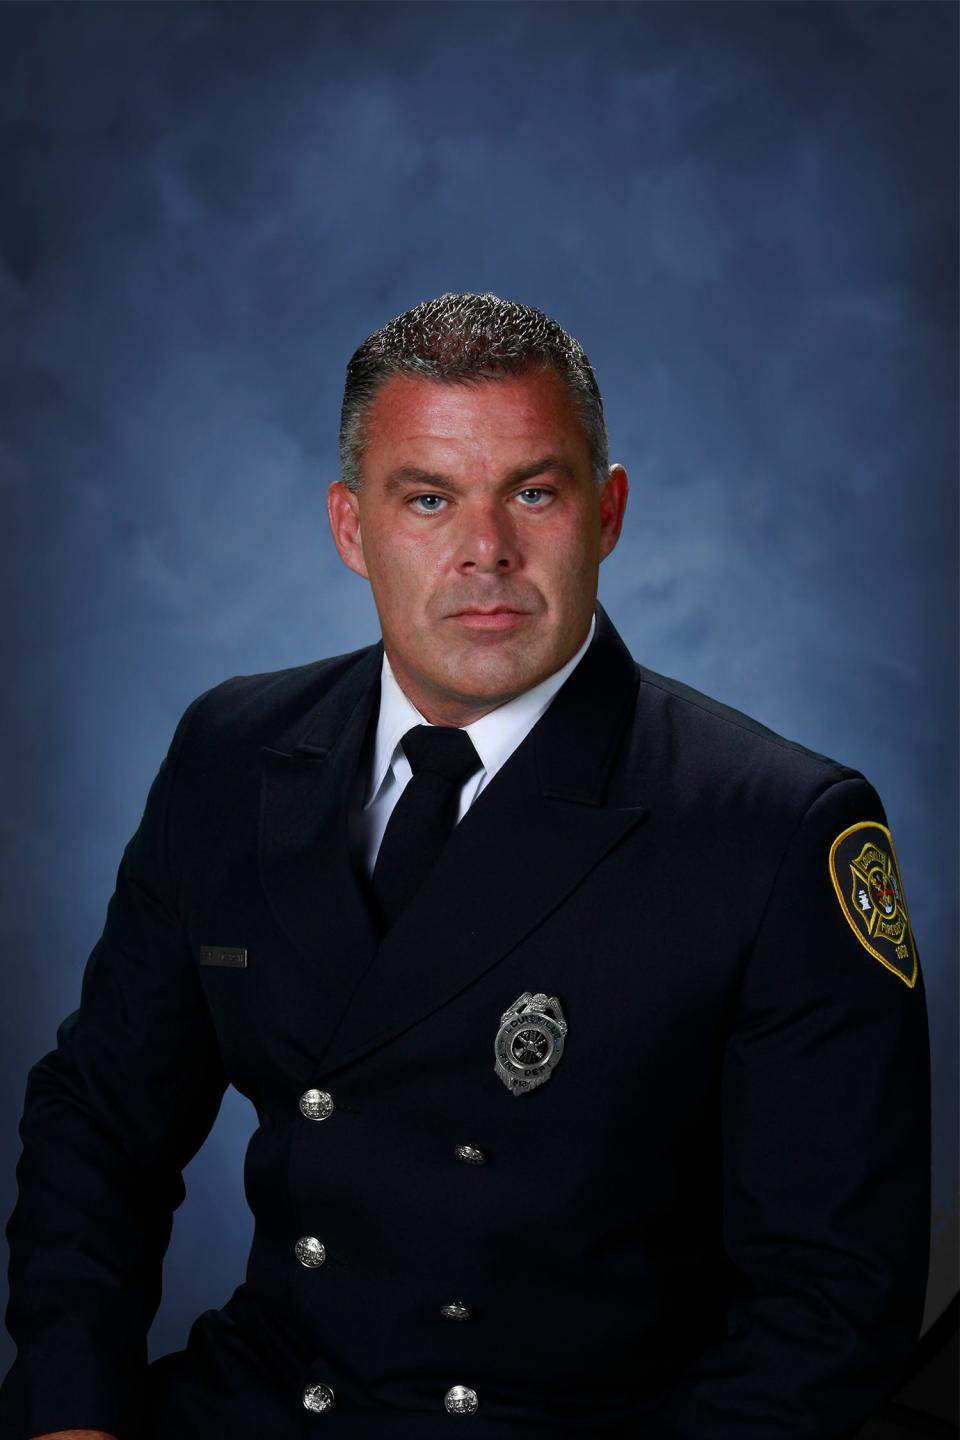 Louisville Firefighter Sean McAdam died from a medical emergency May 11, 2022.